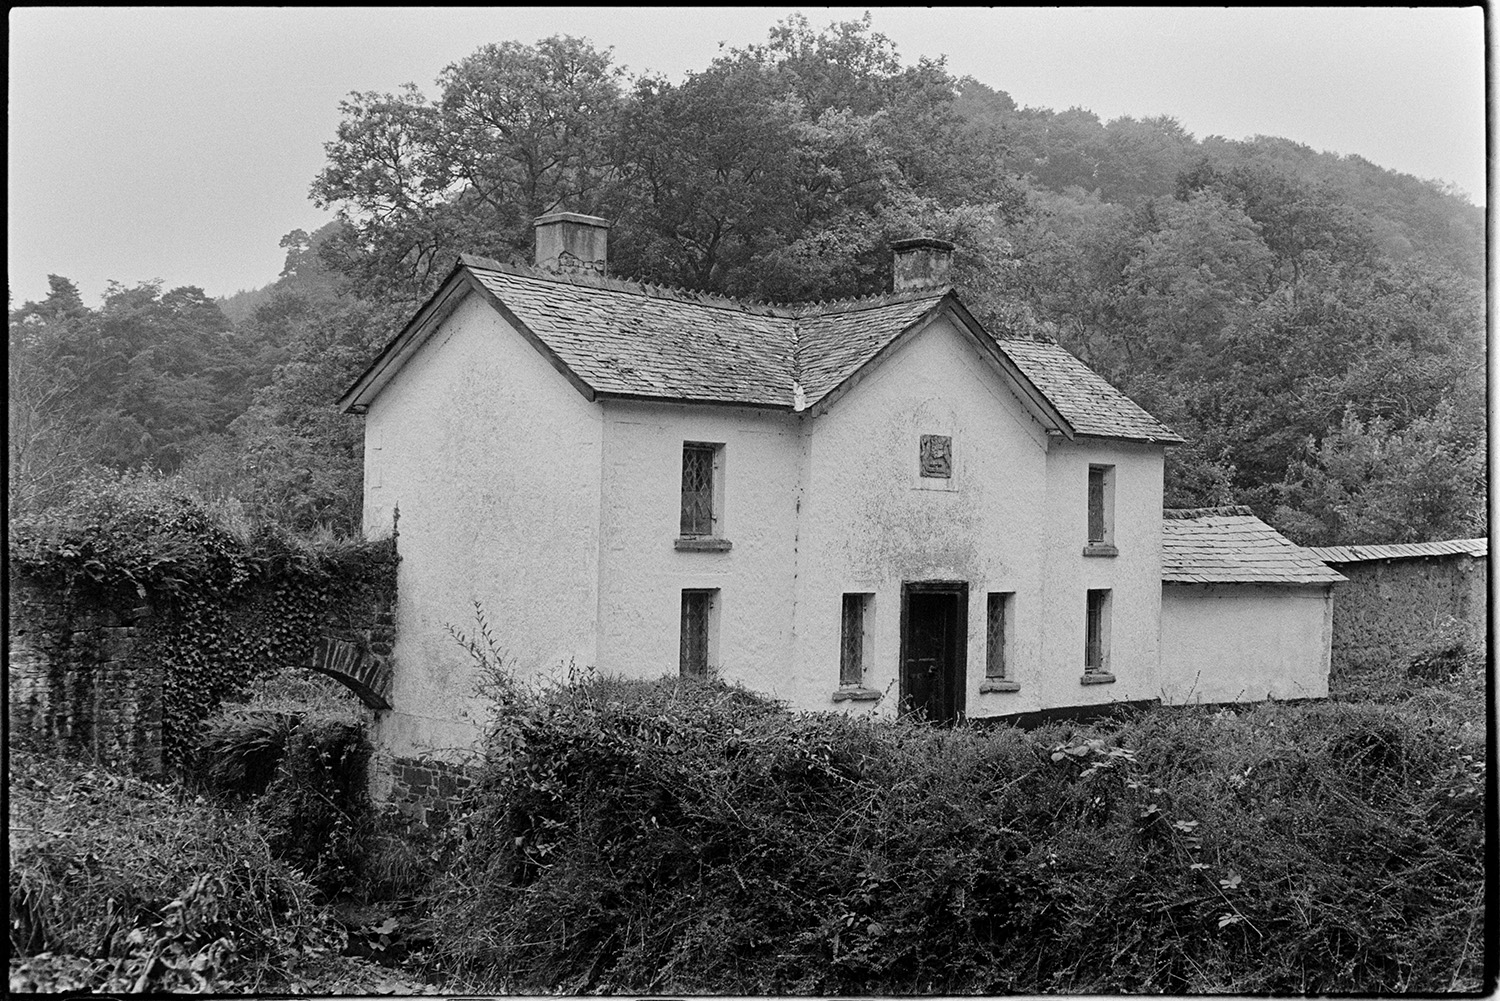 House, lodge at entrance to park. 
[A house with a crest inlaid into the wall, surrounded by trees and a stream at Jewells Bridge, Kings Nympton. A brick and stone archway can be seen over the stream.]